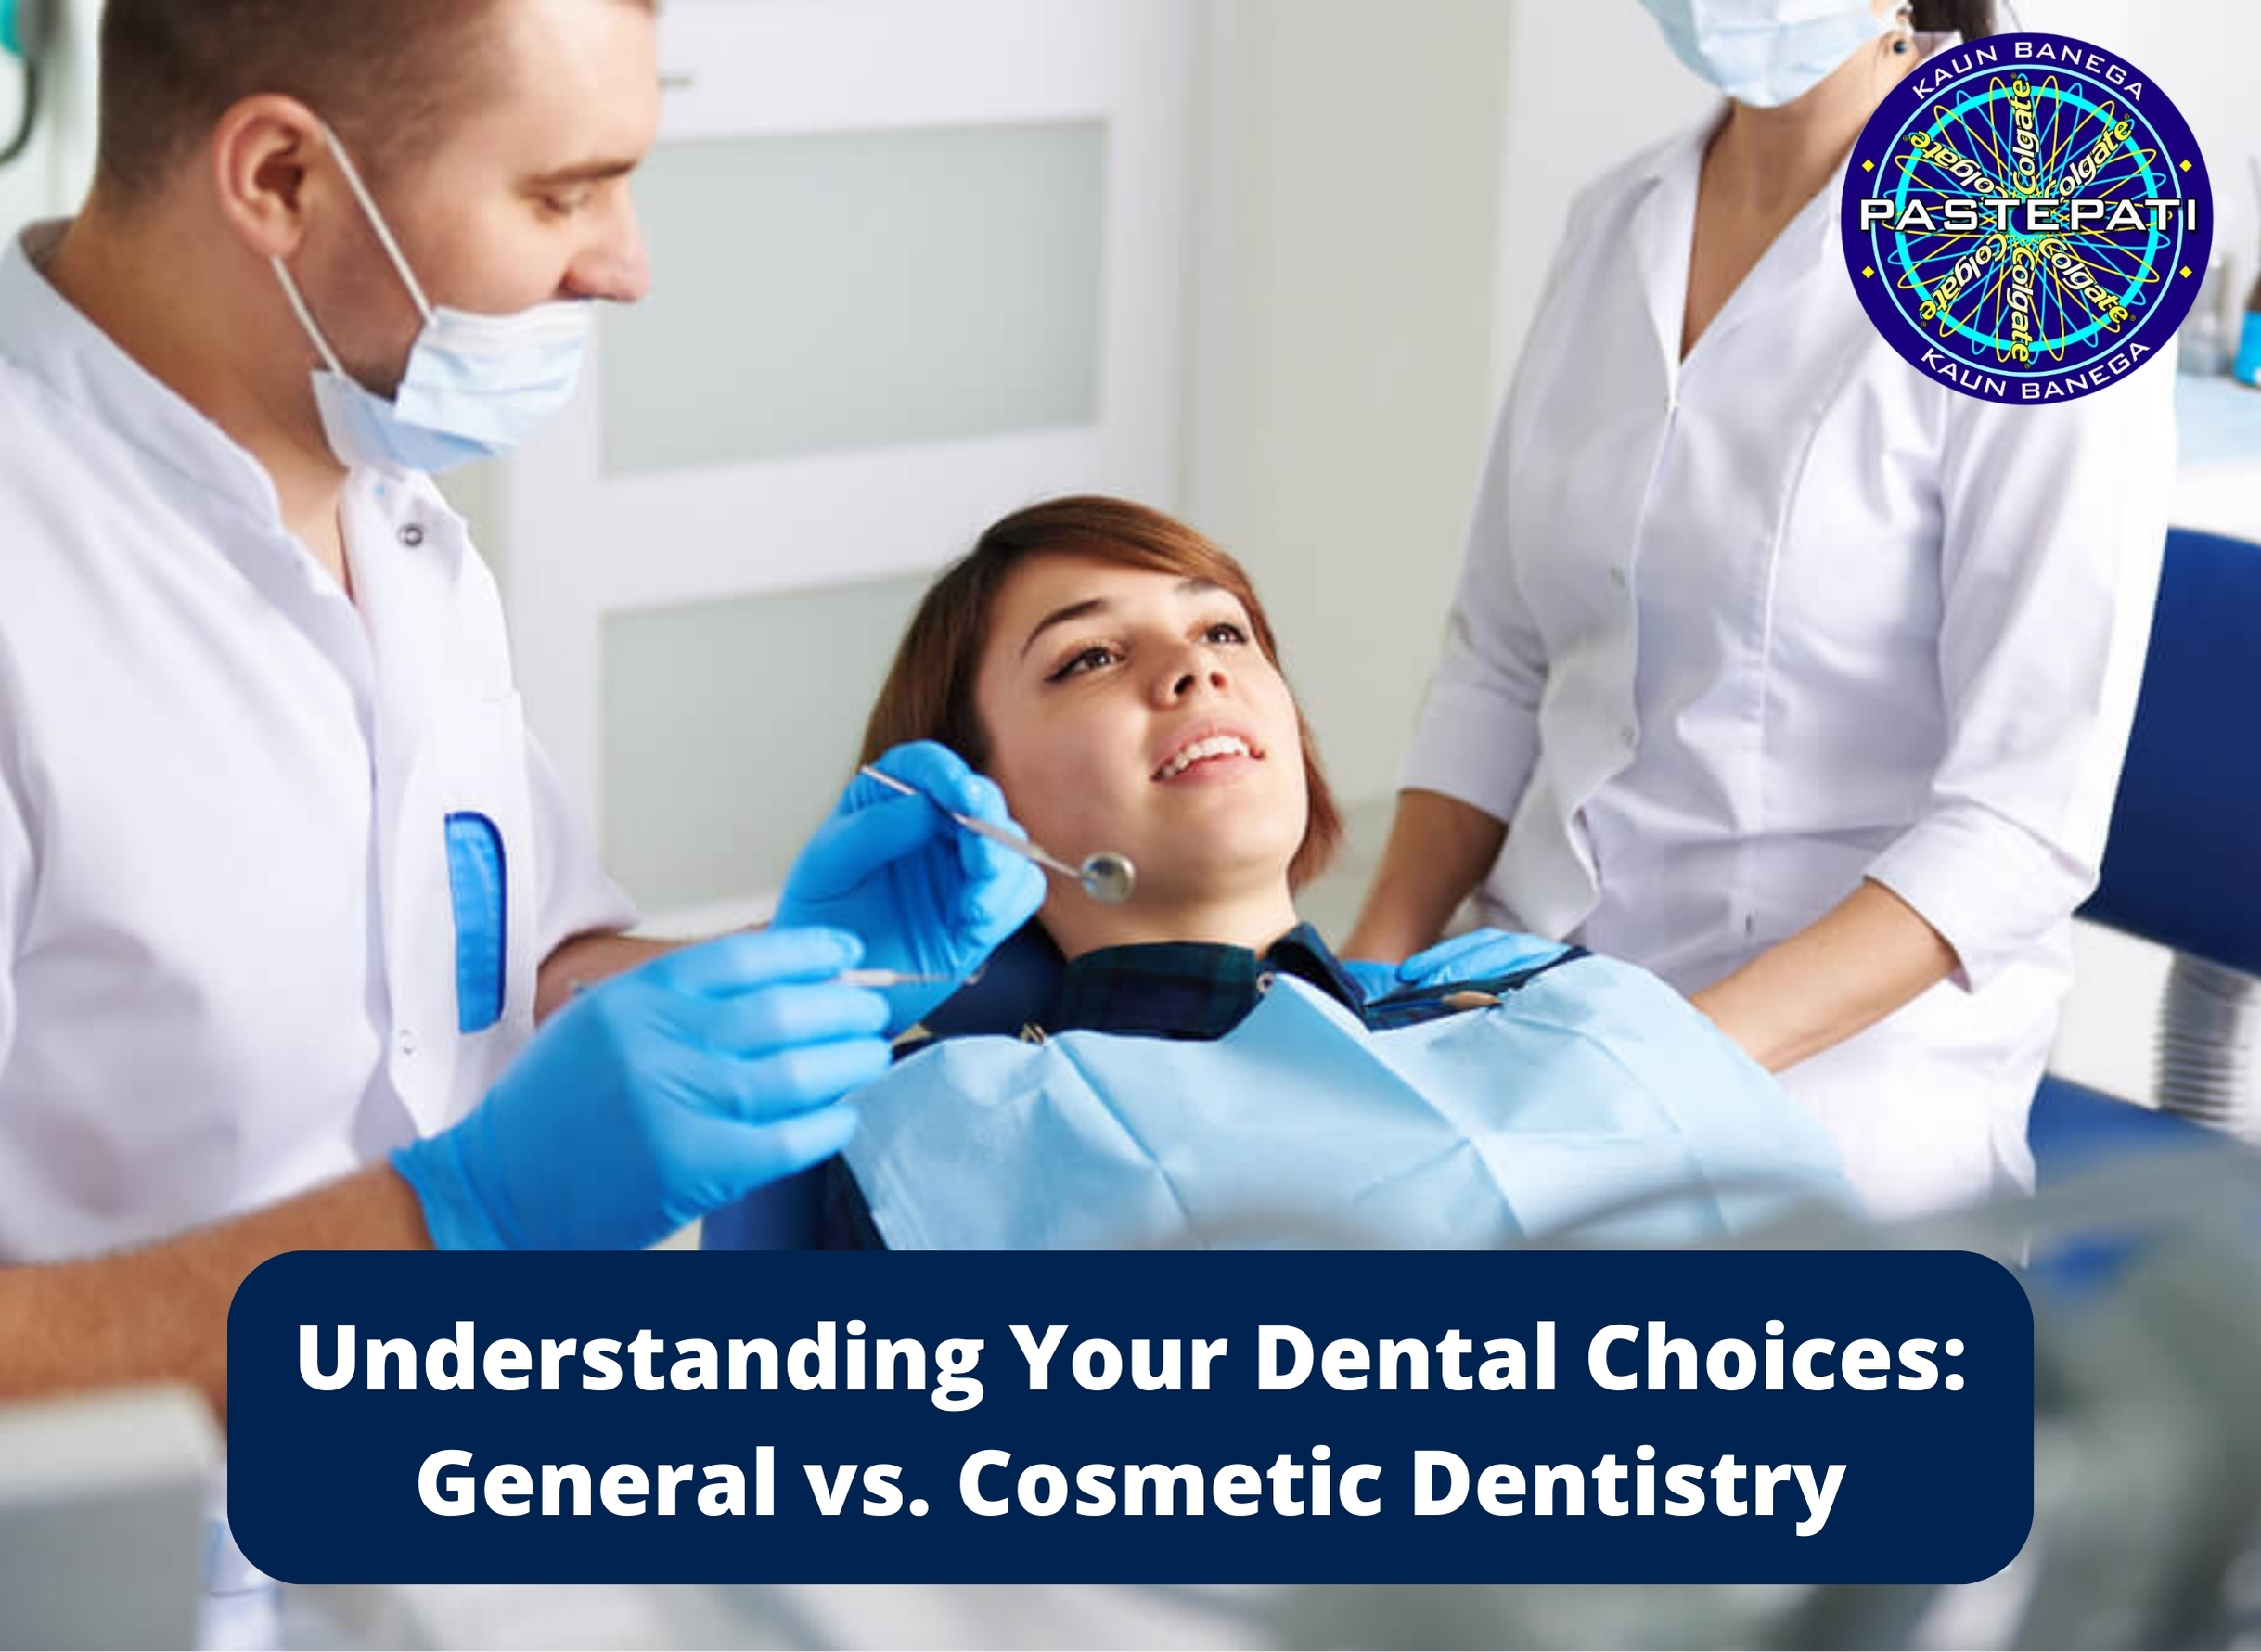 Understanding Your Dental Choices: General vs. Cosmetic Dentistry